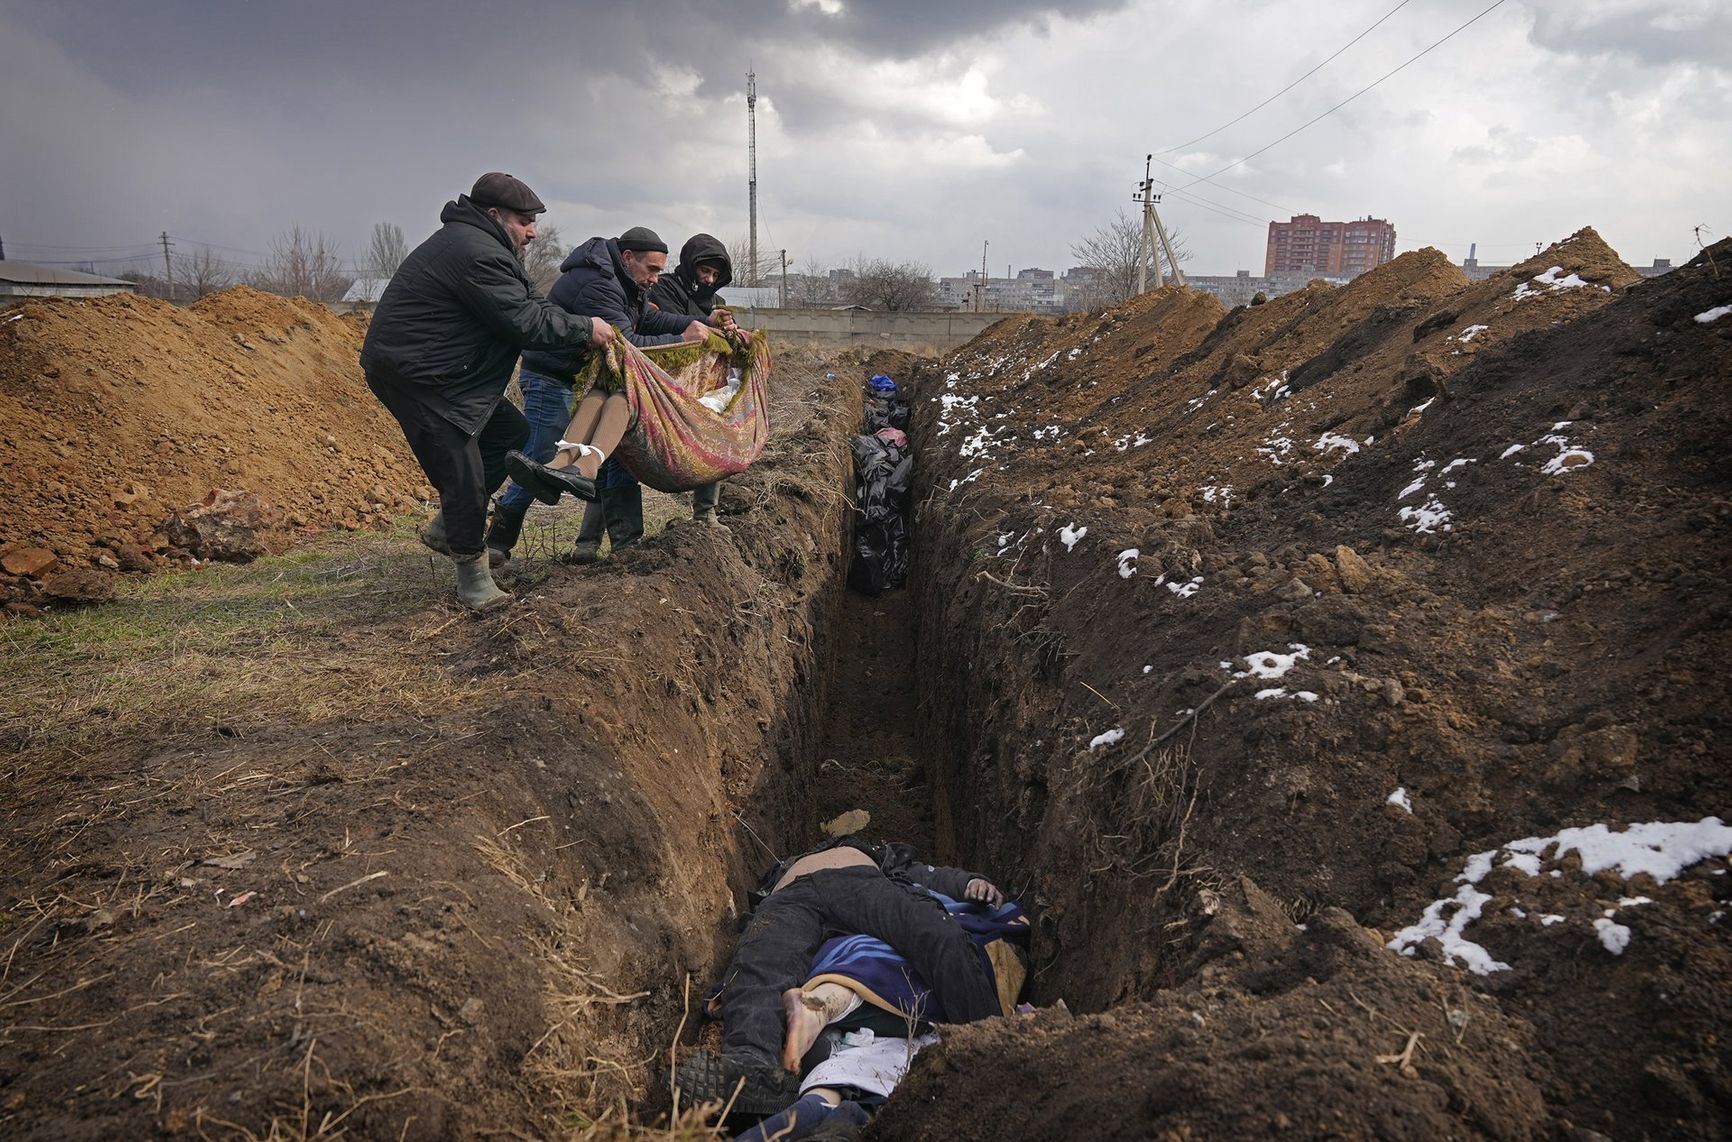 People place dead bodies in a mass grave in an old cemetery in Mariupol, Ukraine. According to the BBC, on some days, up to 150 people a day were buried in mass graves during periods of heavy Russian shelling.